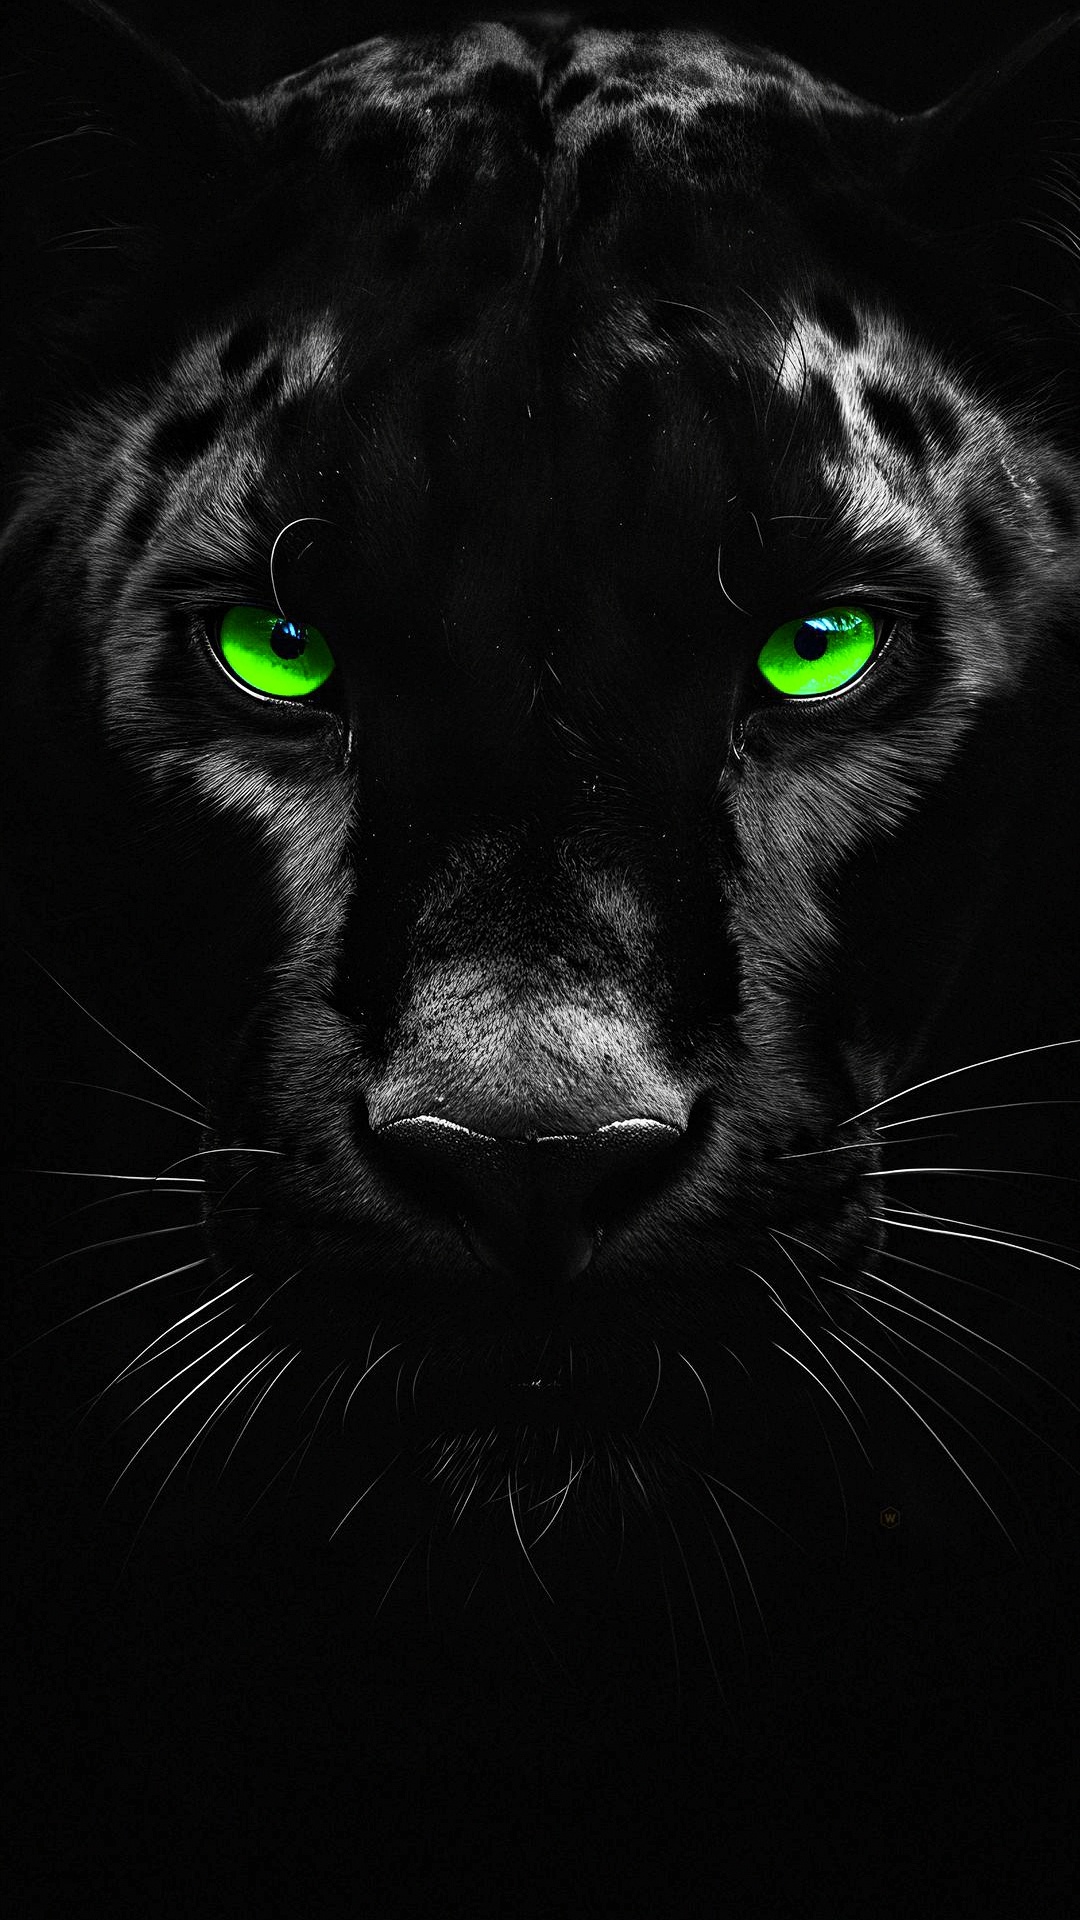 Black Panther Wallpaper' Poster by ColorMe Creative | Displate